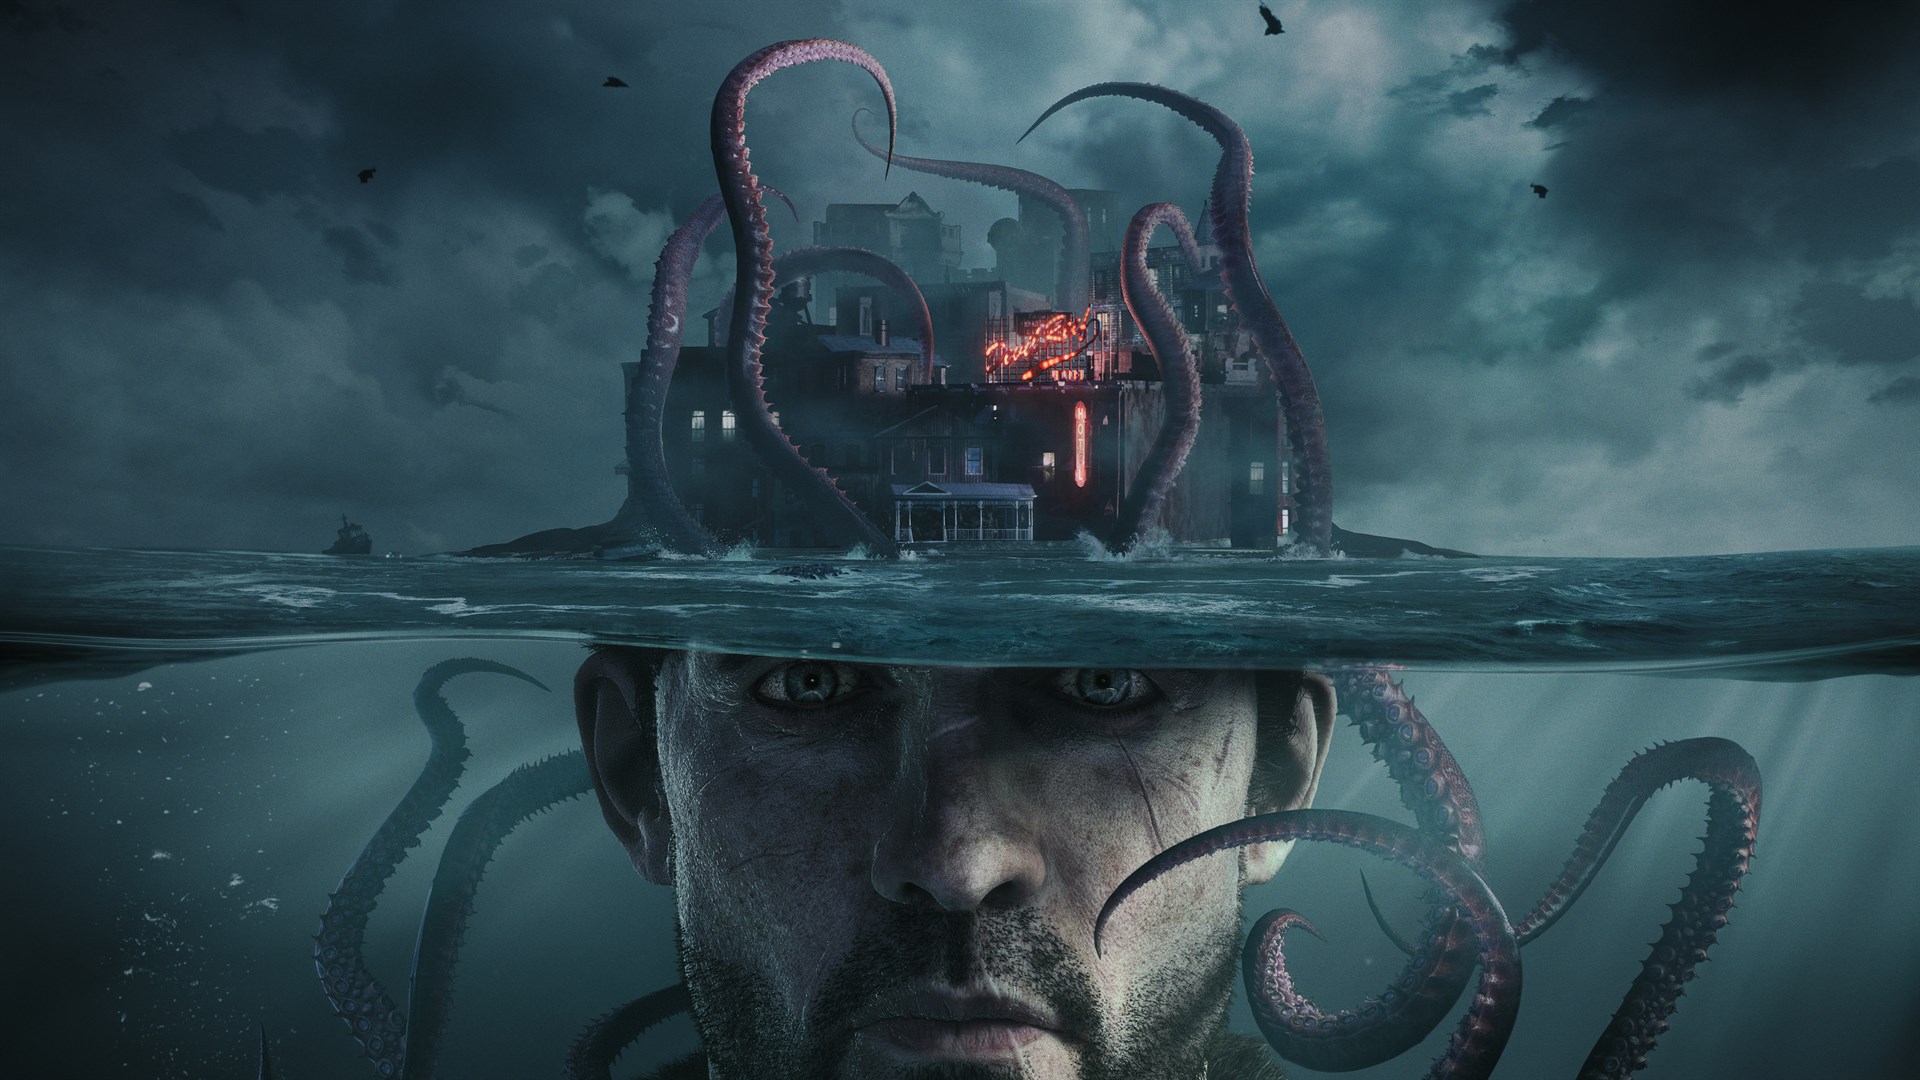 the sinking city worshippers of the necronomicon